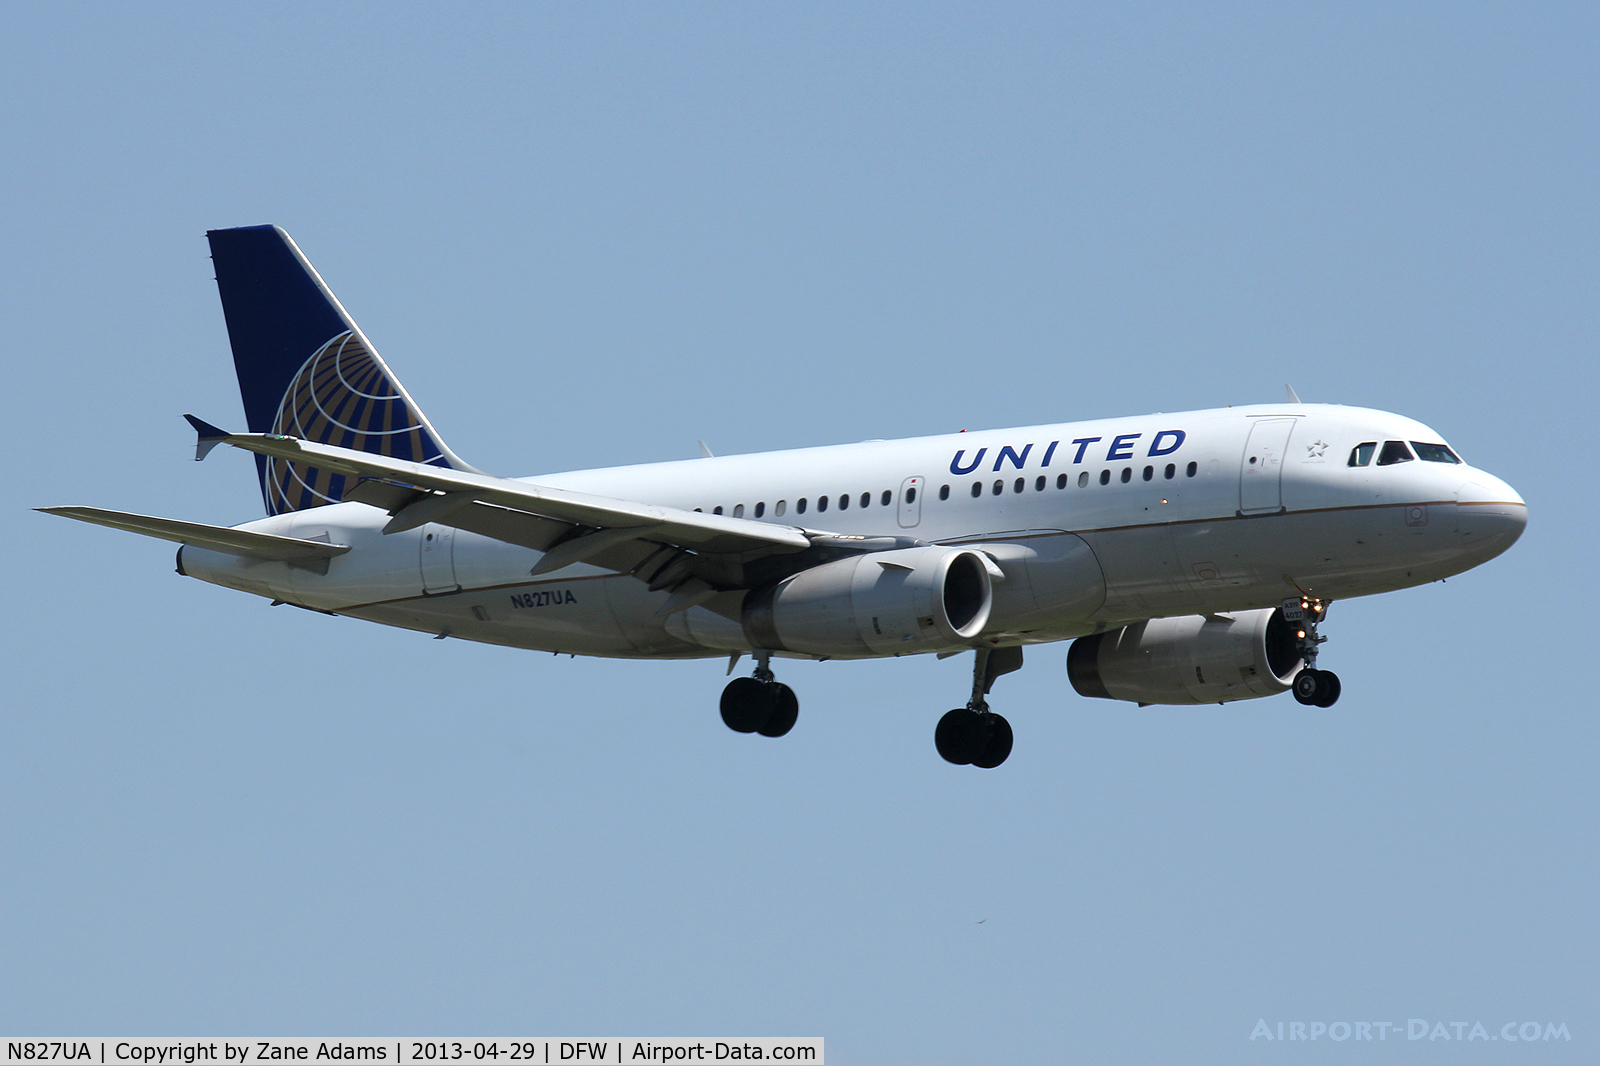 N827UA, 1999 Airbus A319-131 C/N 1022, United Airlines landing at DFW Airport